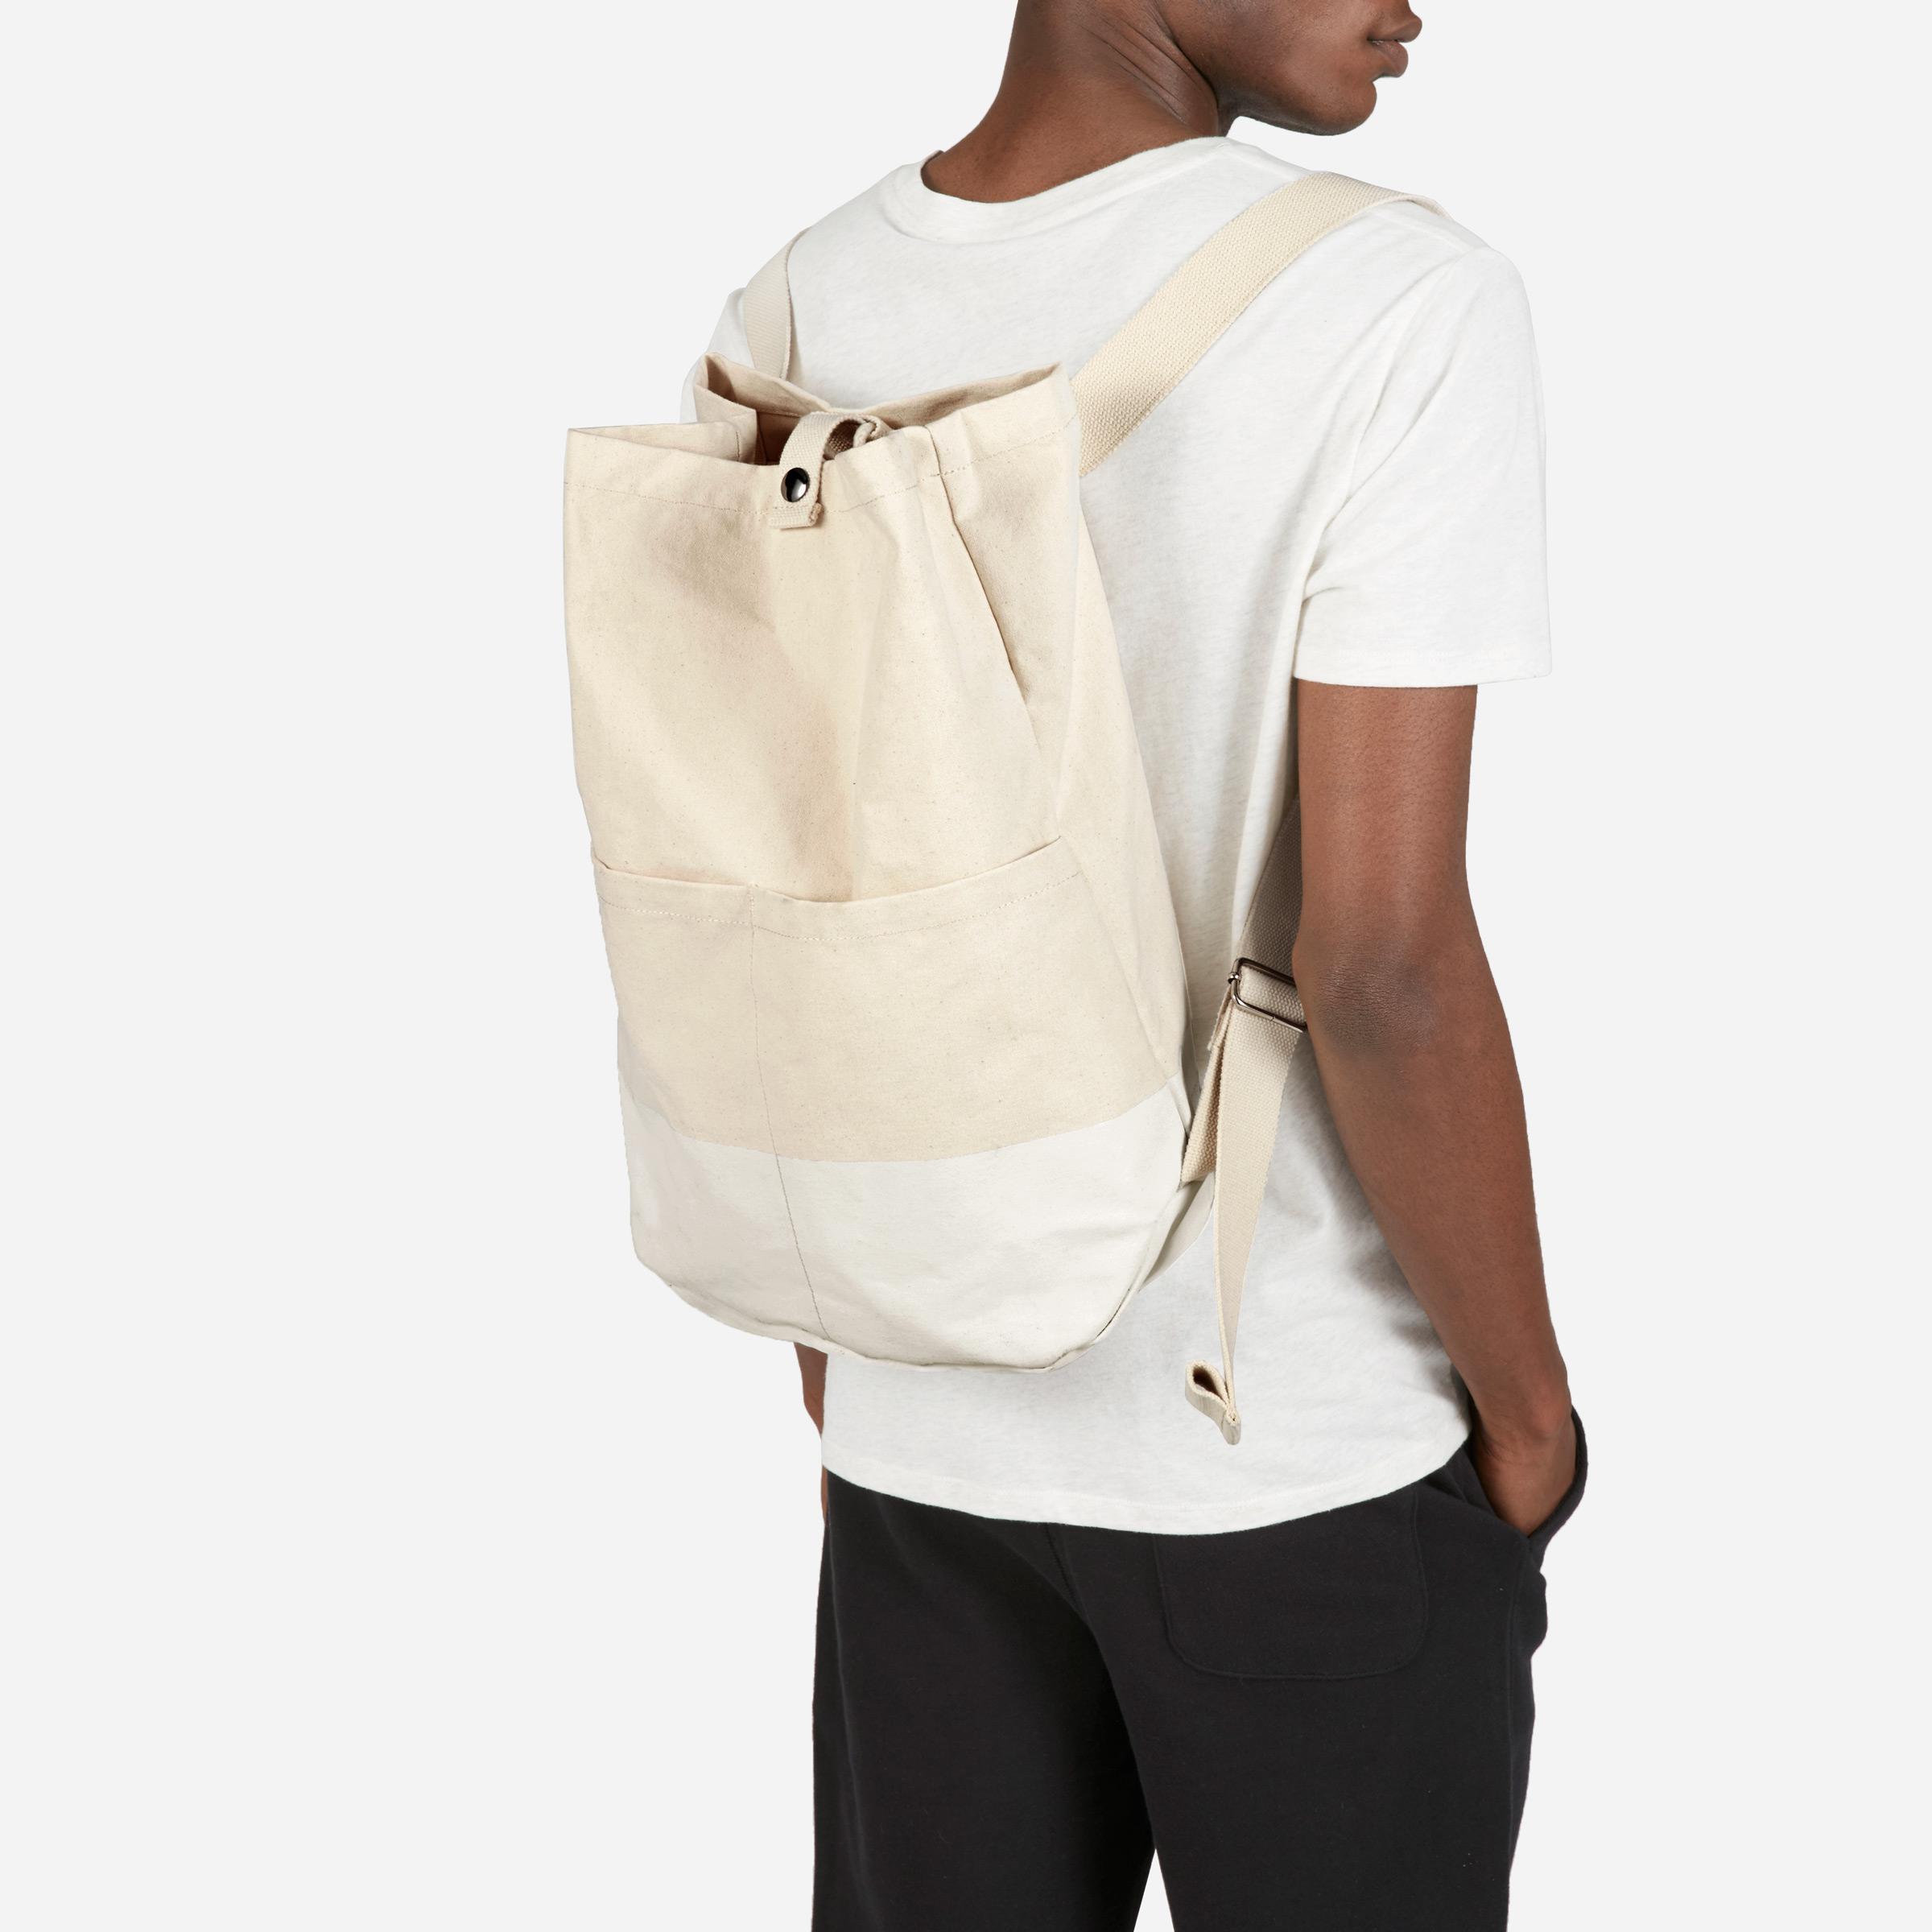 Everlane The Beach Canvas Backpack in Natural / White (White) for Men - Lyst